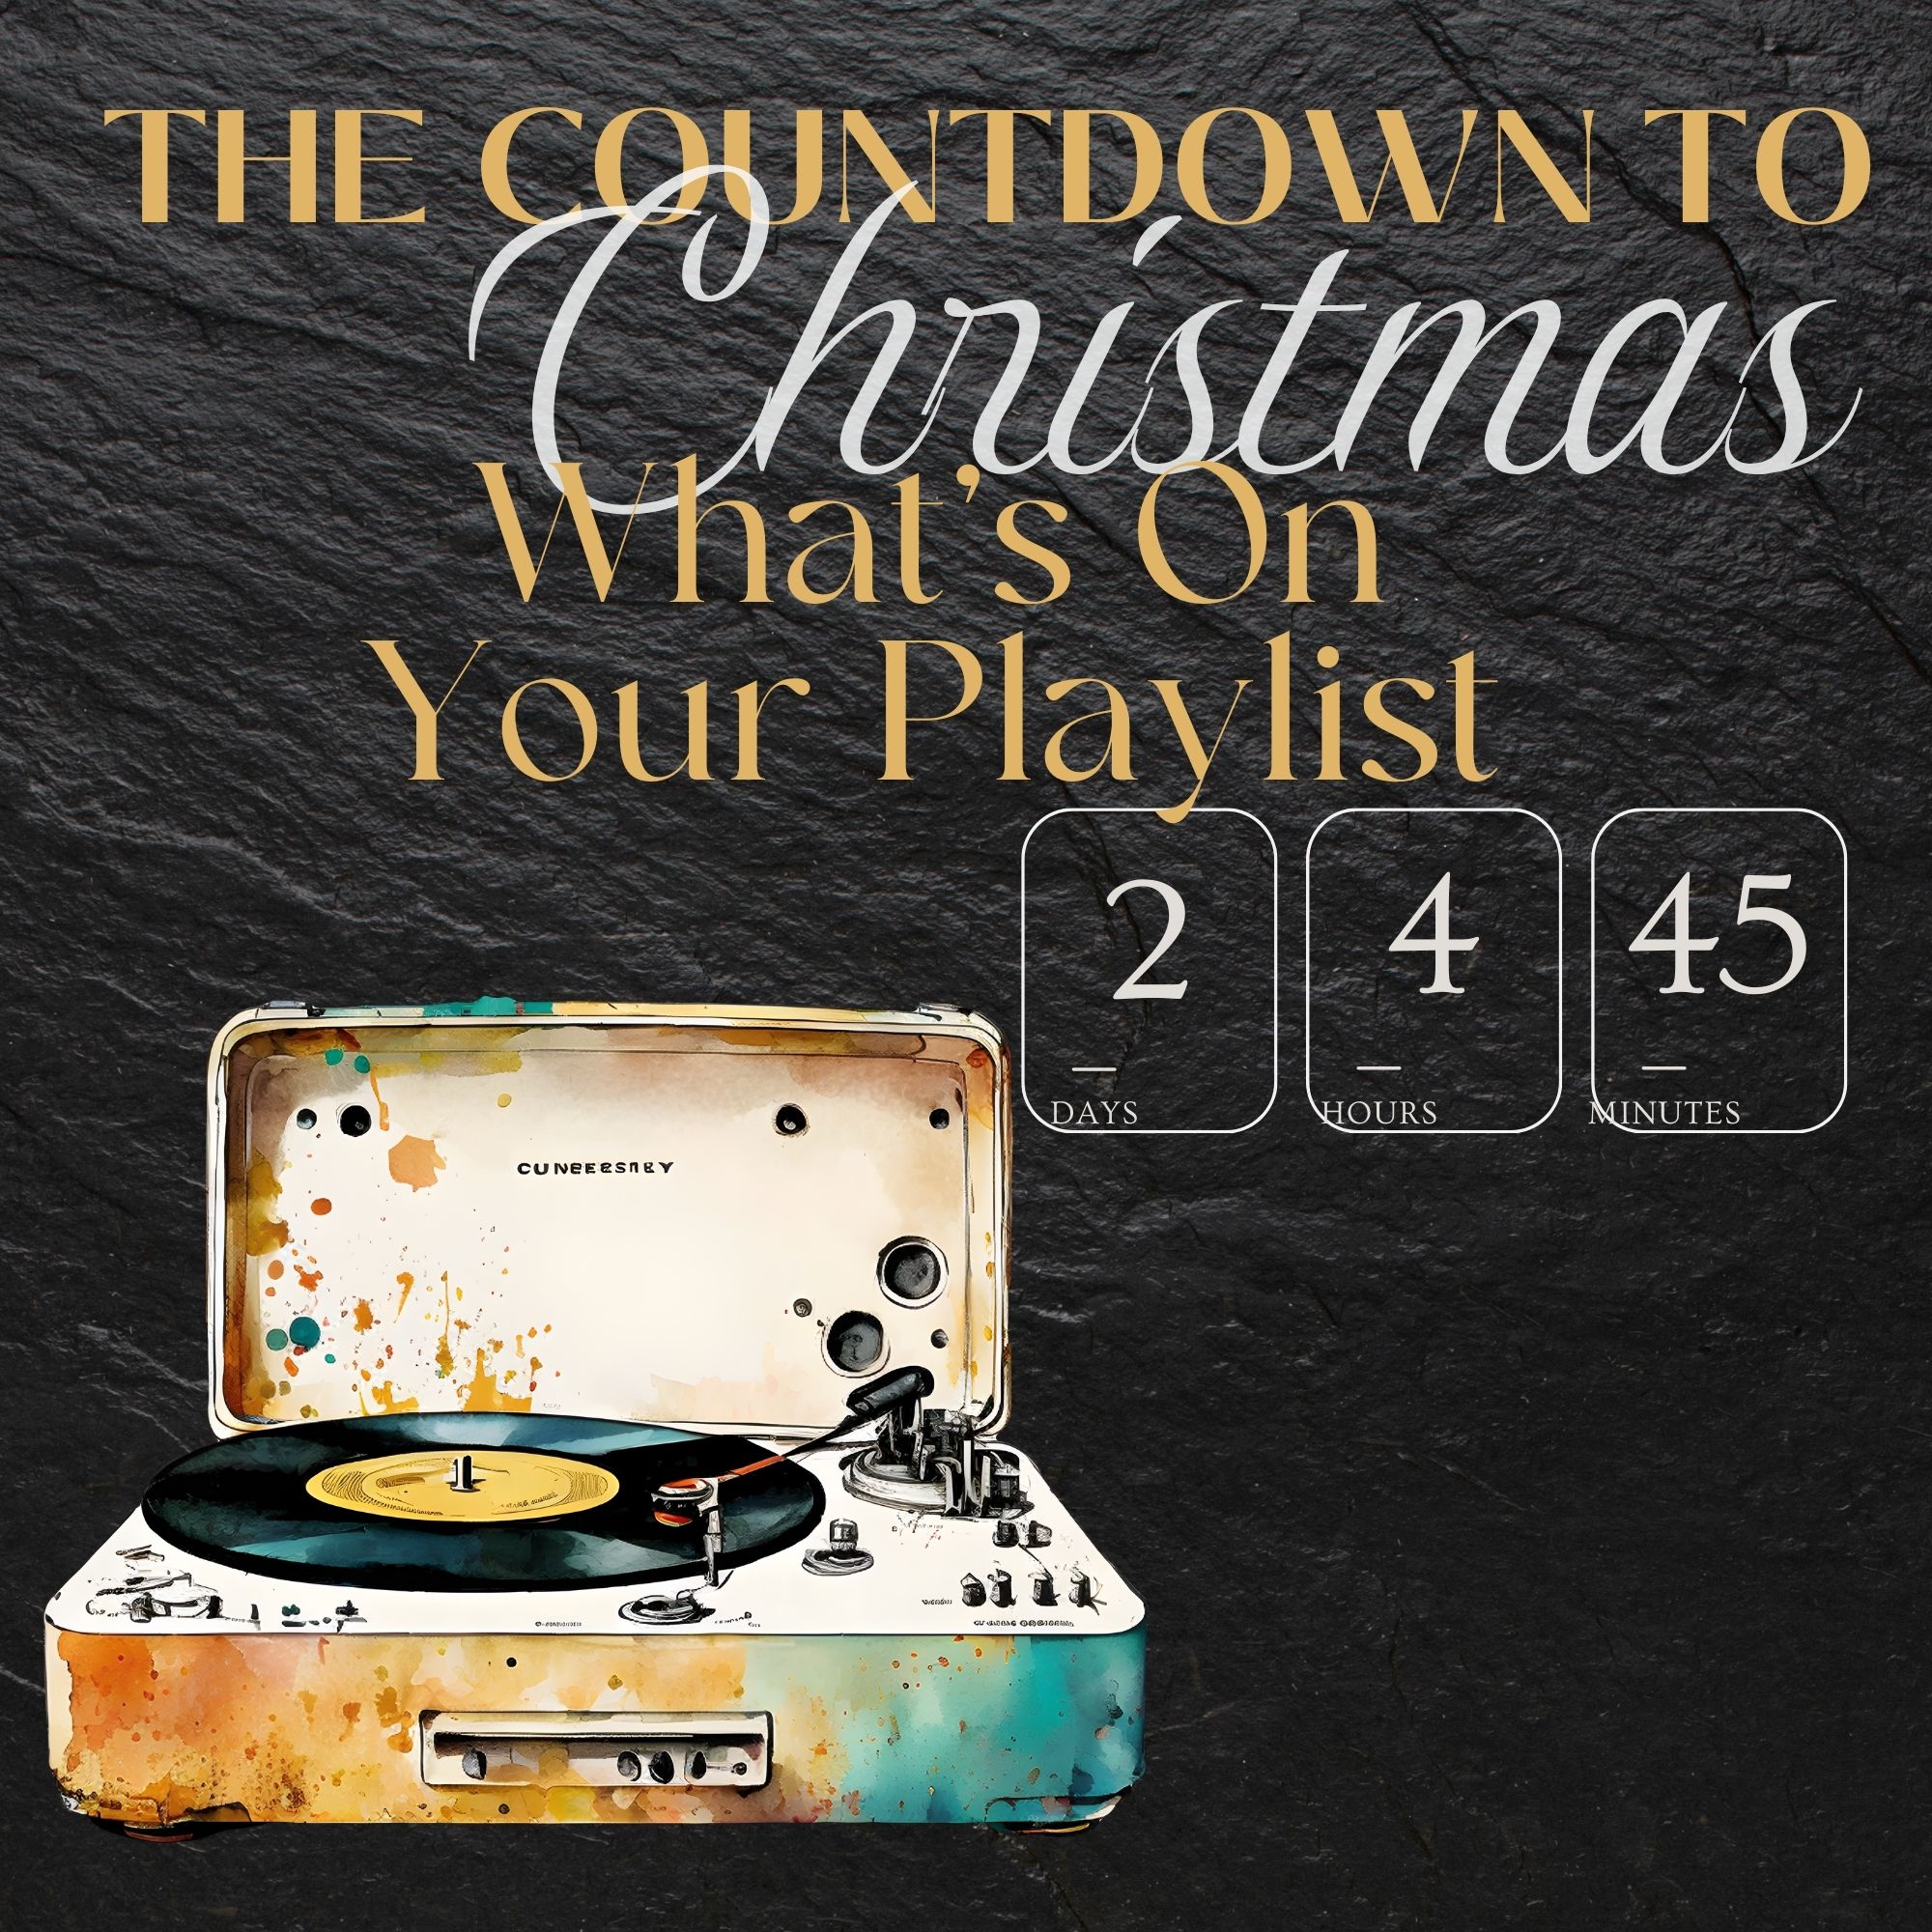 Countdown to Christmas: What’s On Your Playlist?